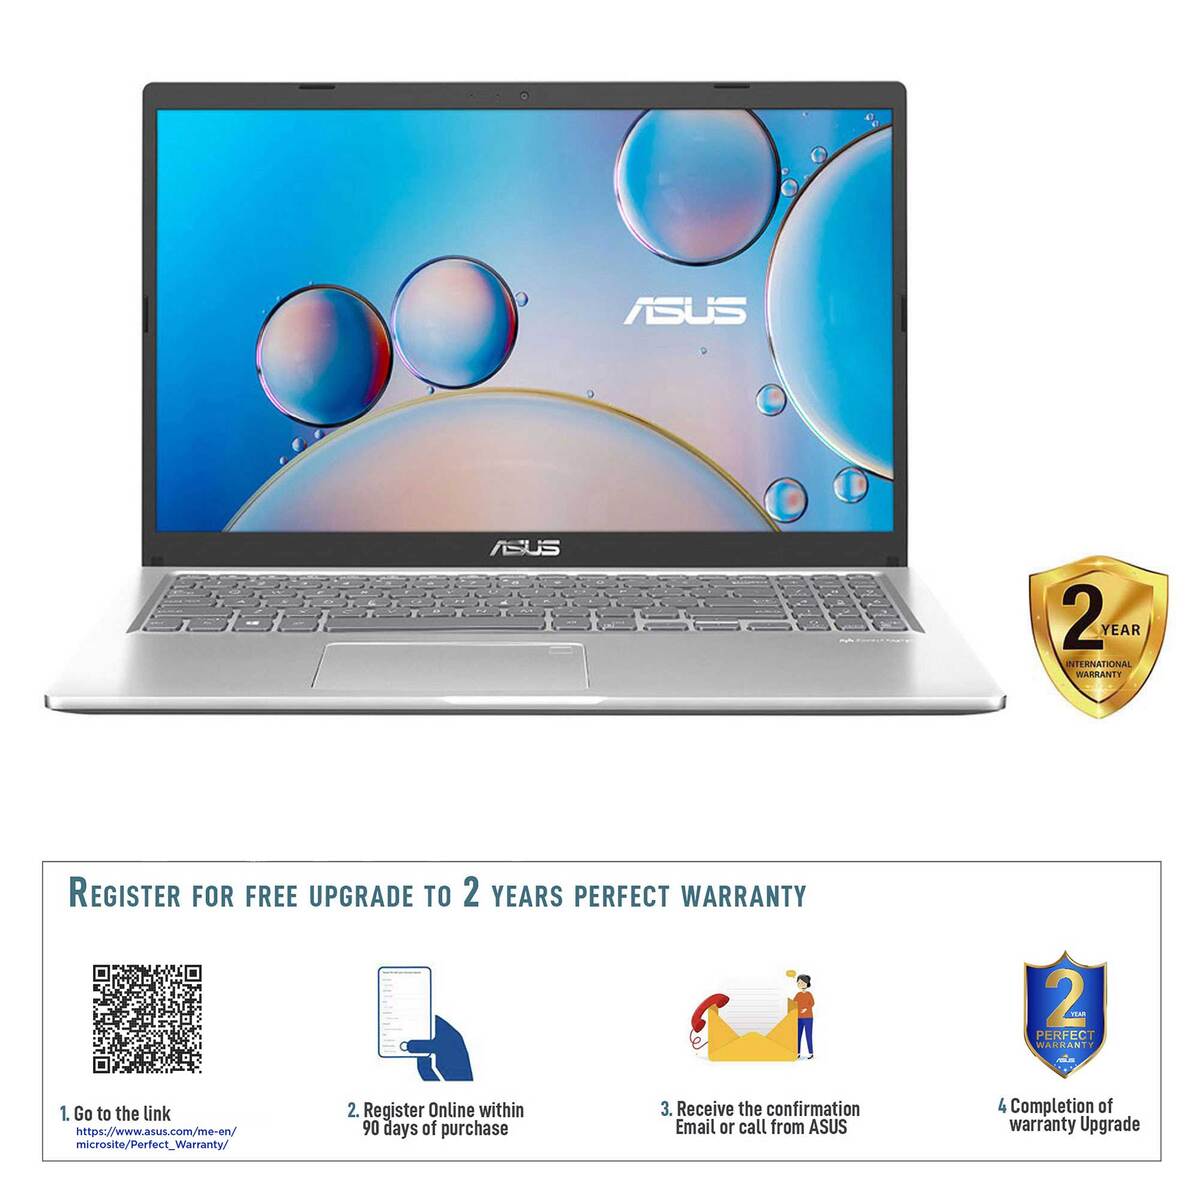 Asus X515 Laptop, 15.6 Inches, Intel Celeron N4020, 4GB RAM, 128GB SSD, Intel UHD Graphics 600, Windows 11 Home in S Mode, Transparent Silver, X515MA-BR913WS